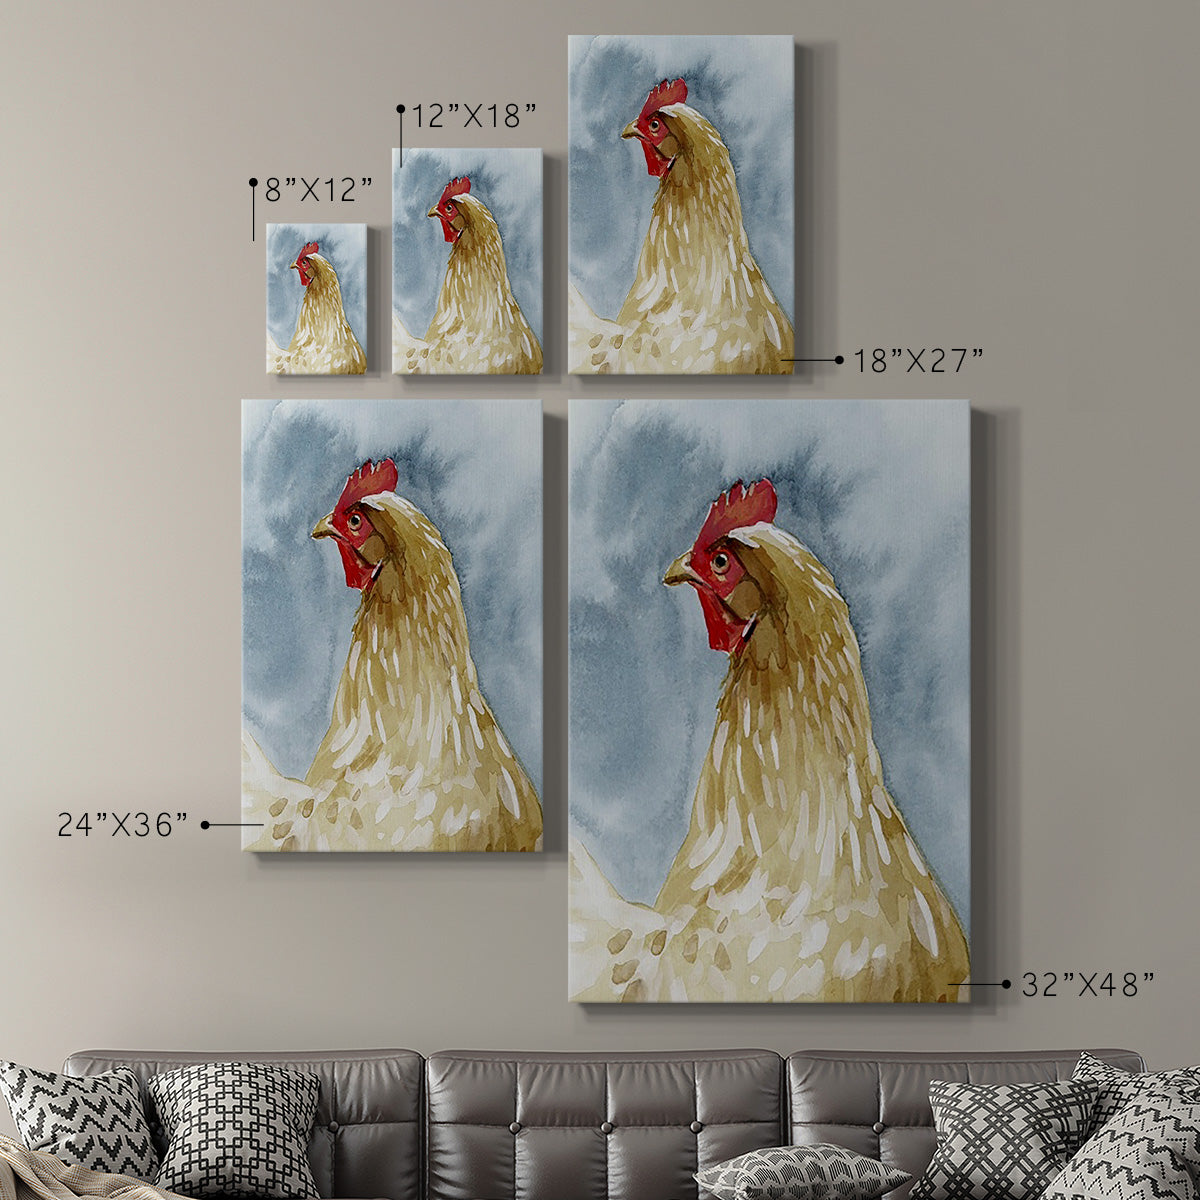 Chicken Portrait I Premium Gallery Wrapped Canvas - Ready to Hang